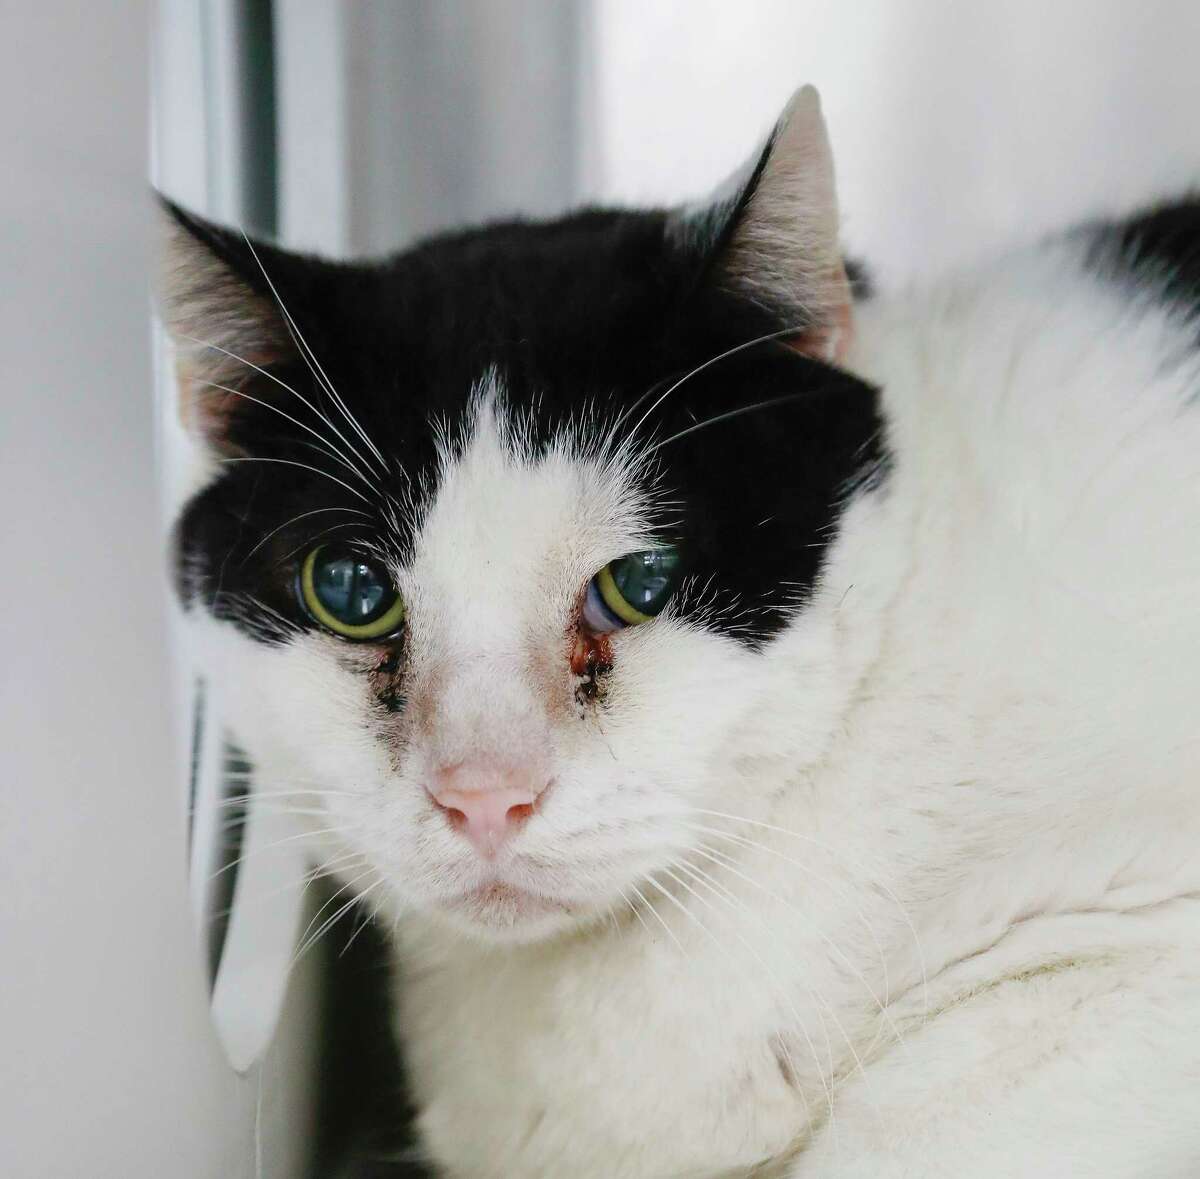 Frank (A569420) is an 8-year-old, male, black/white Domestic Shorthair cat available for adoption from Harris County Pets. Frank and his companion, Oliver (A569422) are two mild-mannered seniors, who were surrendered by the same owner because the owner was allergic to cats. They are litter box trained, and love women, men and other cats.